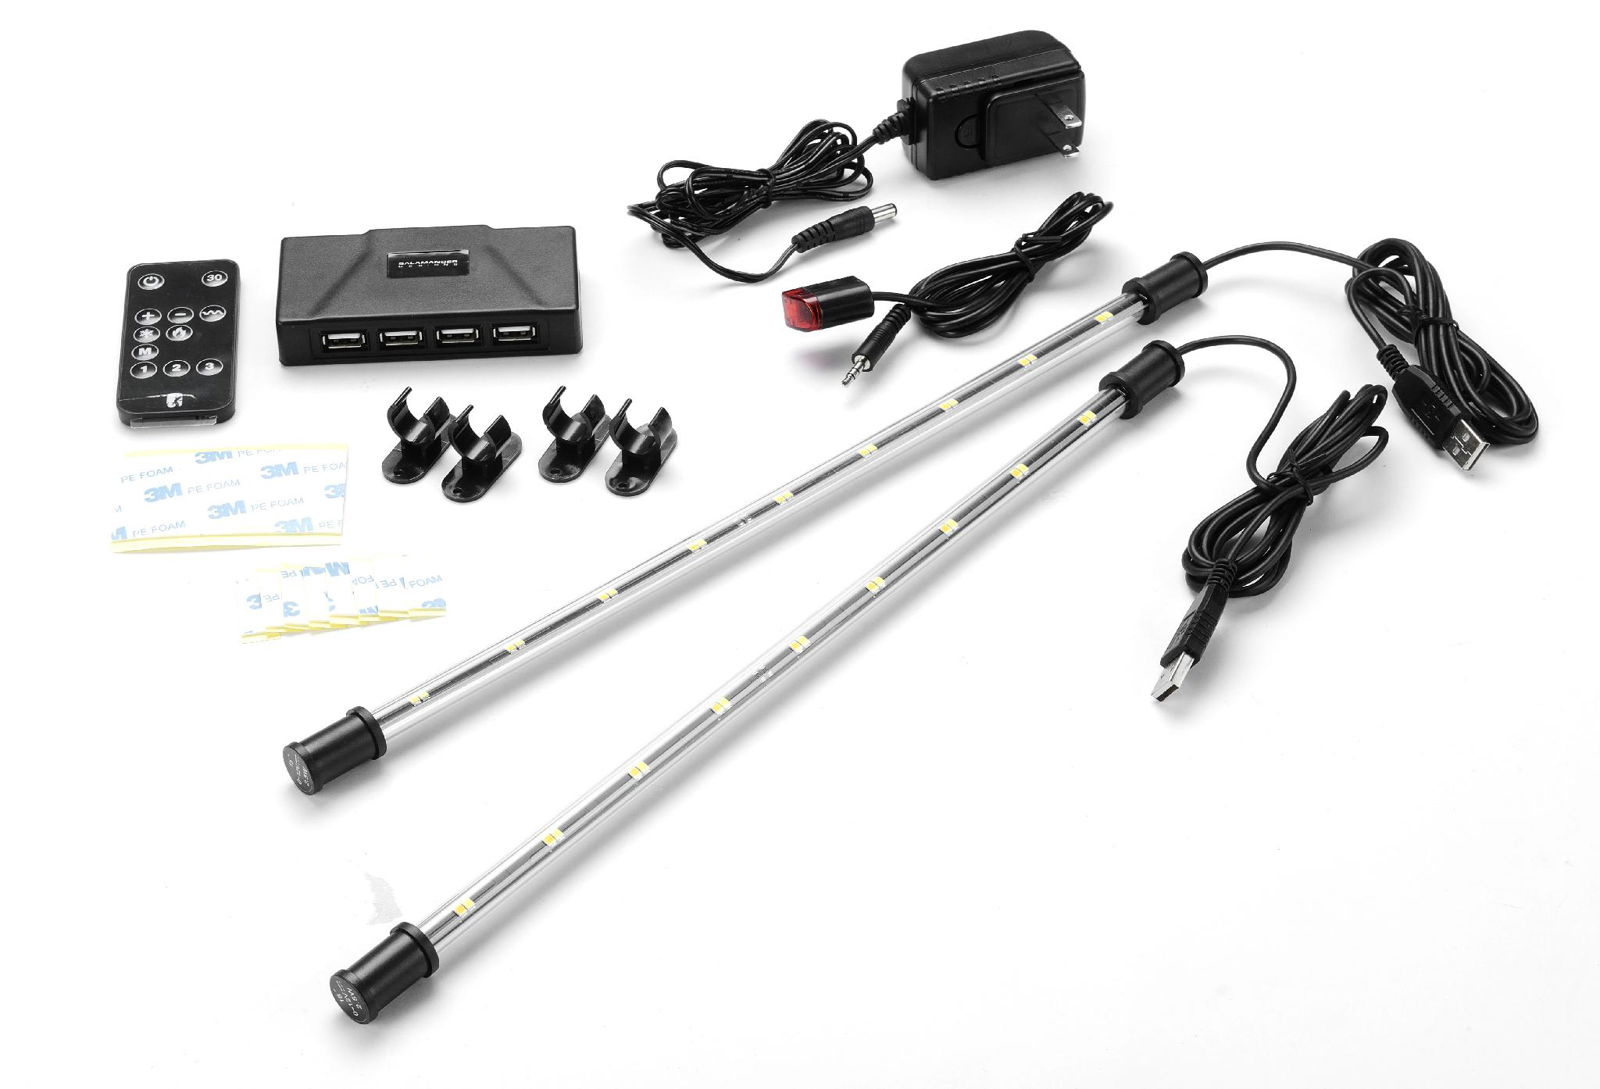 Home Accent Lighting System for Home Theater, TV Backlight 2